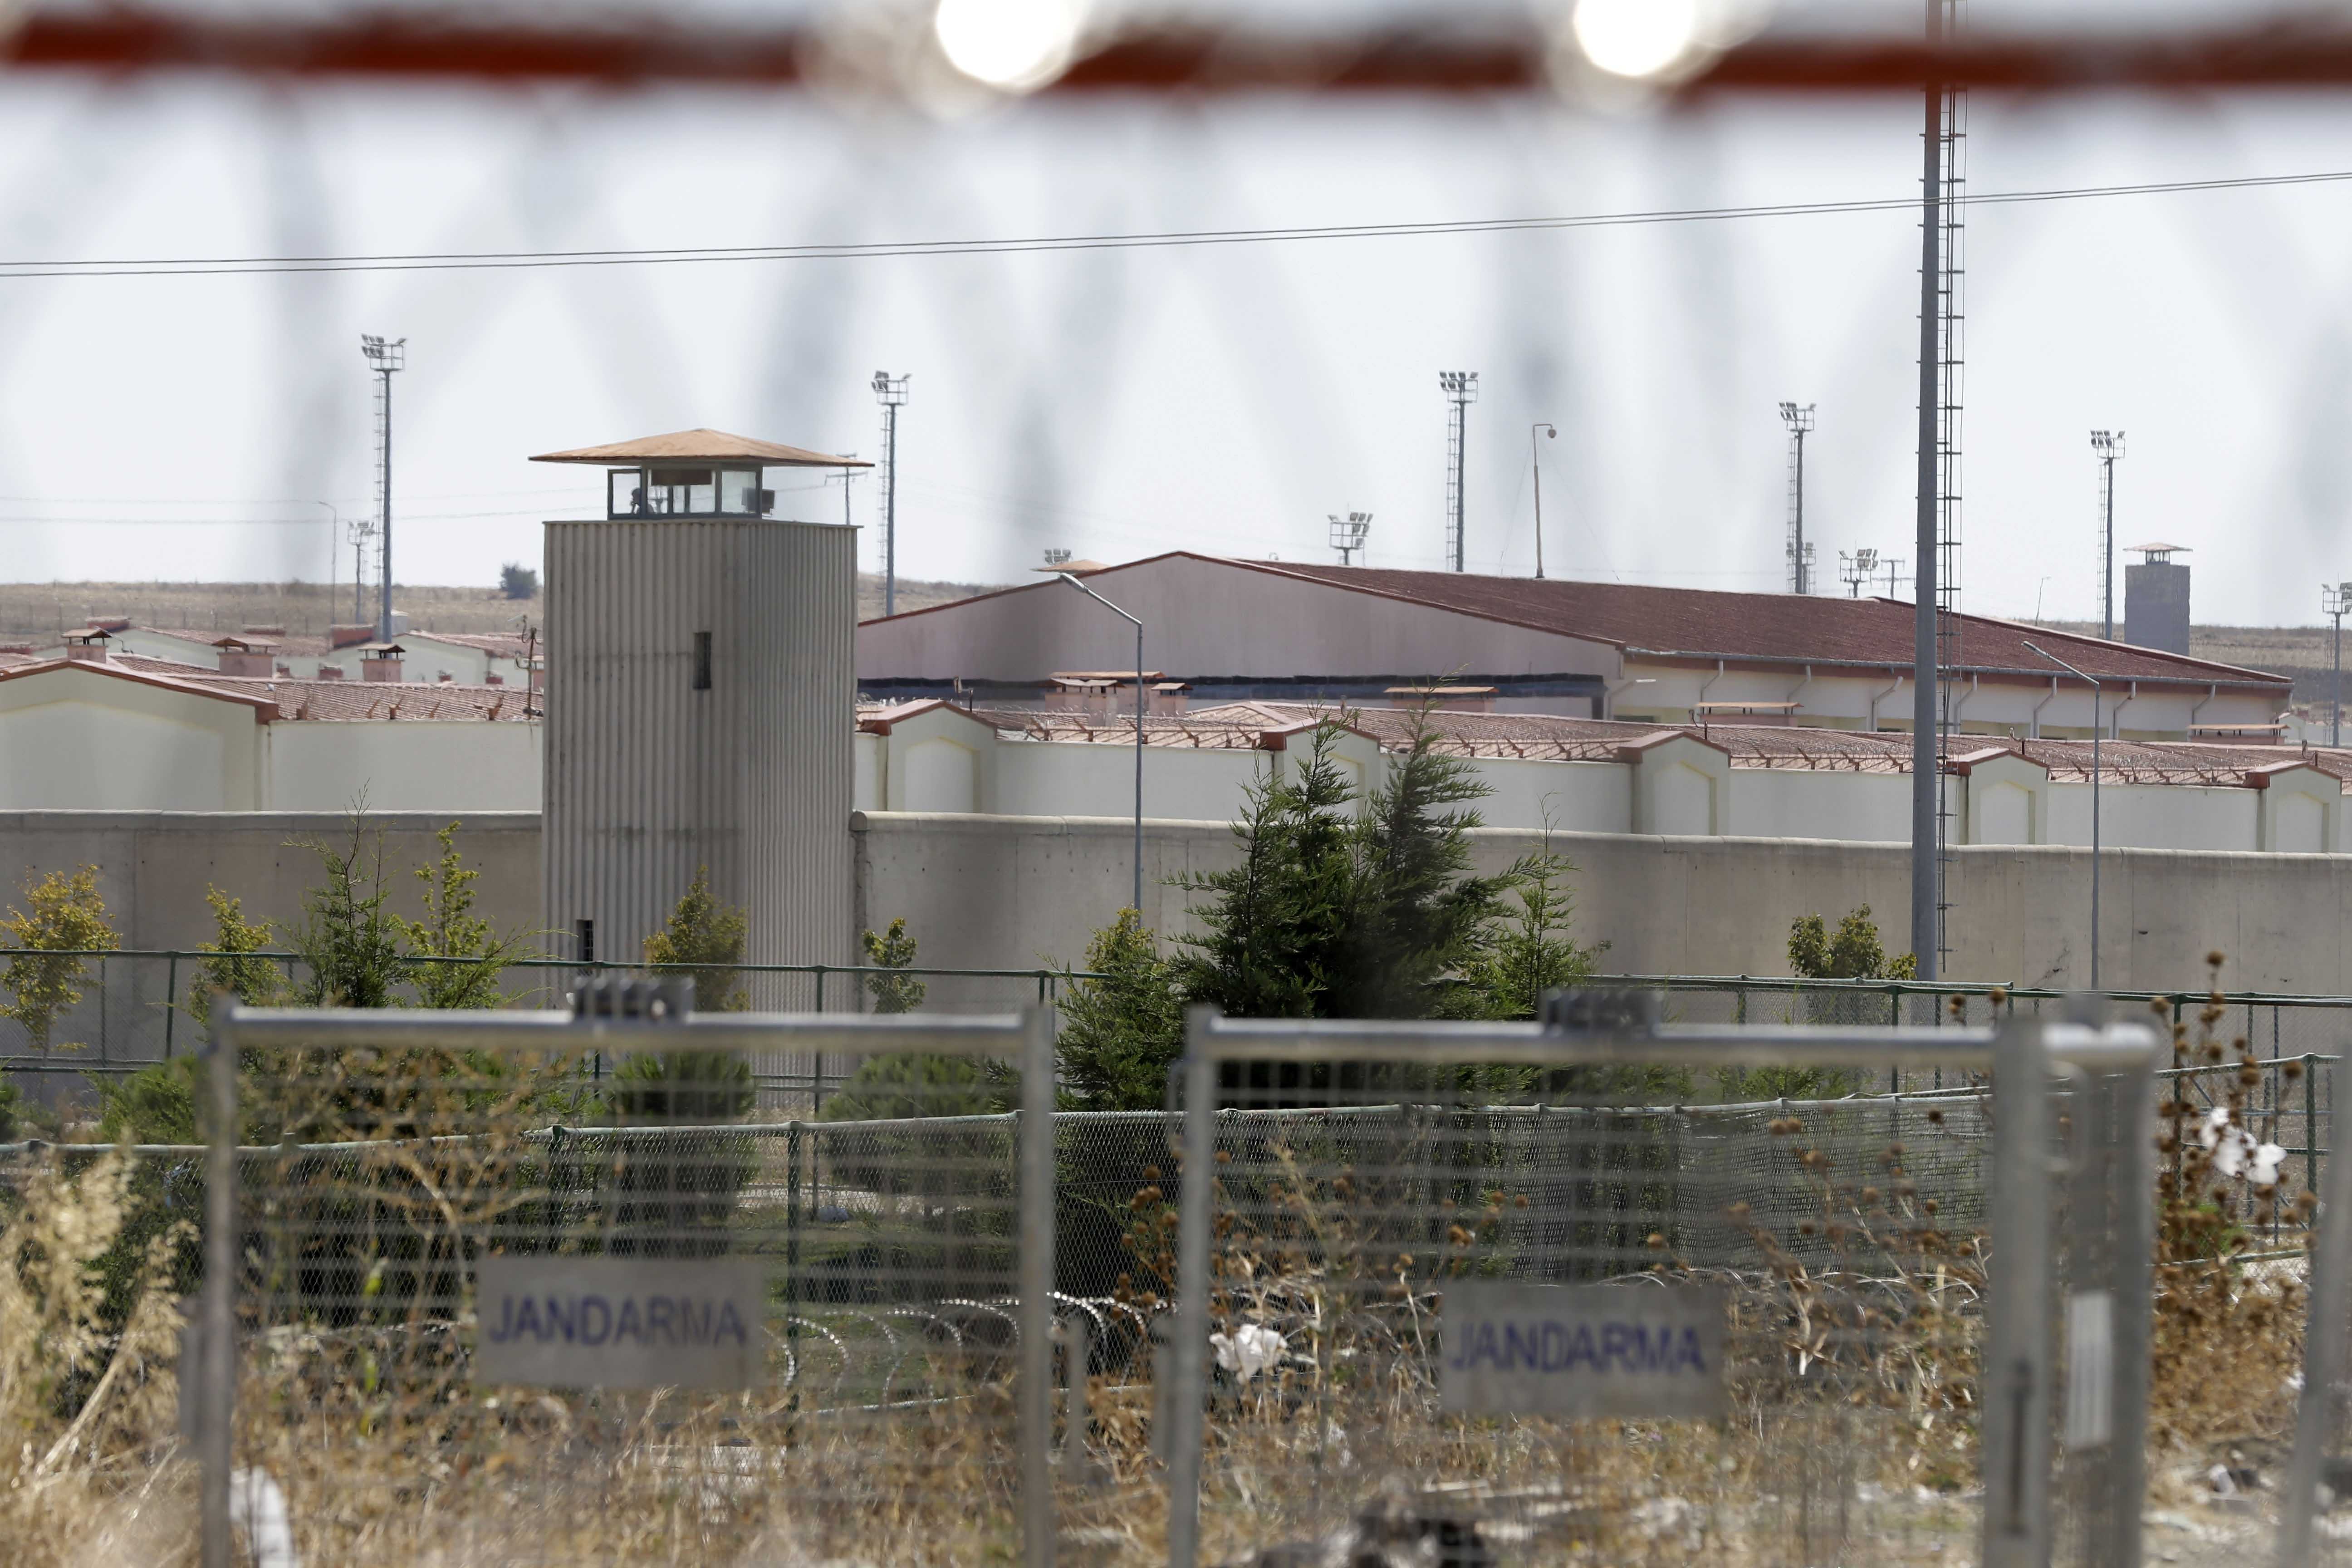 Thousands of political prisoners are held in the vast Silivri campus prison, Istanbul.